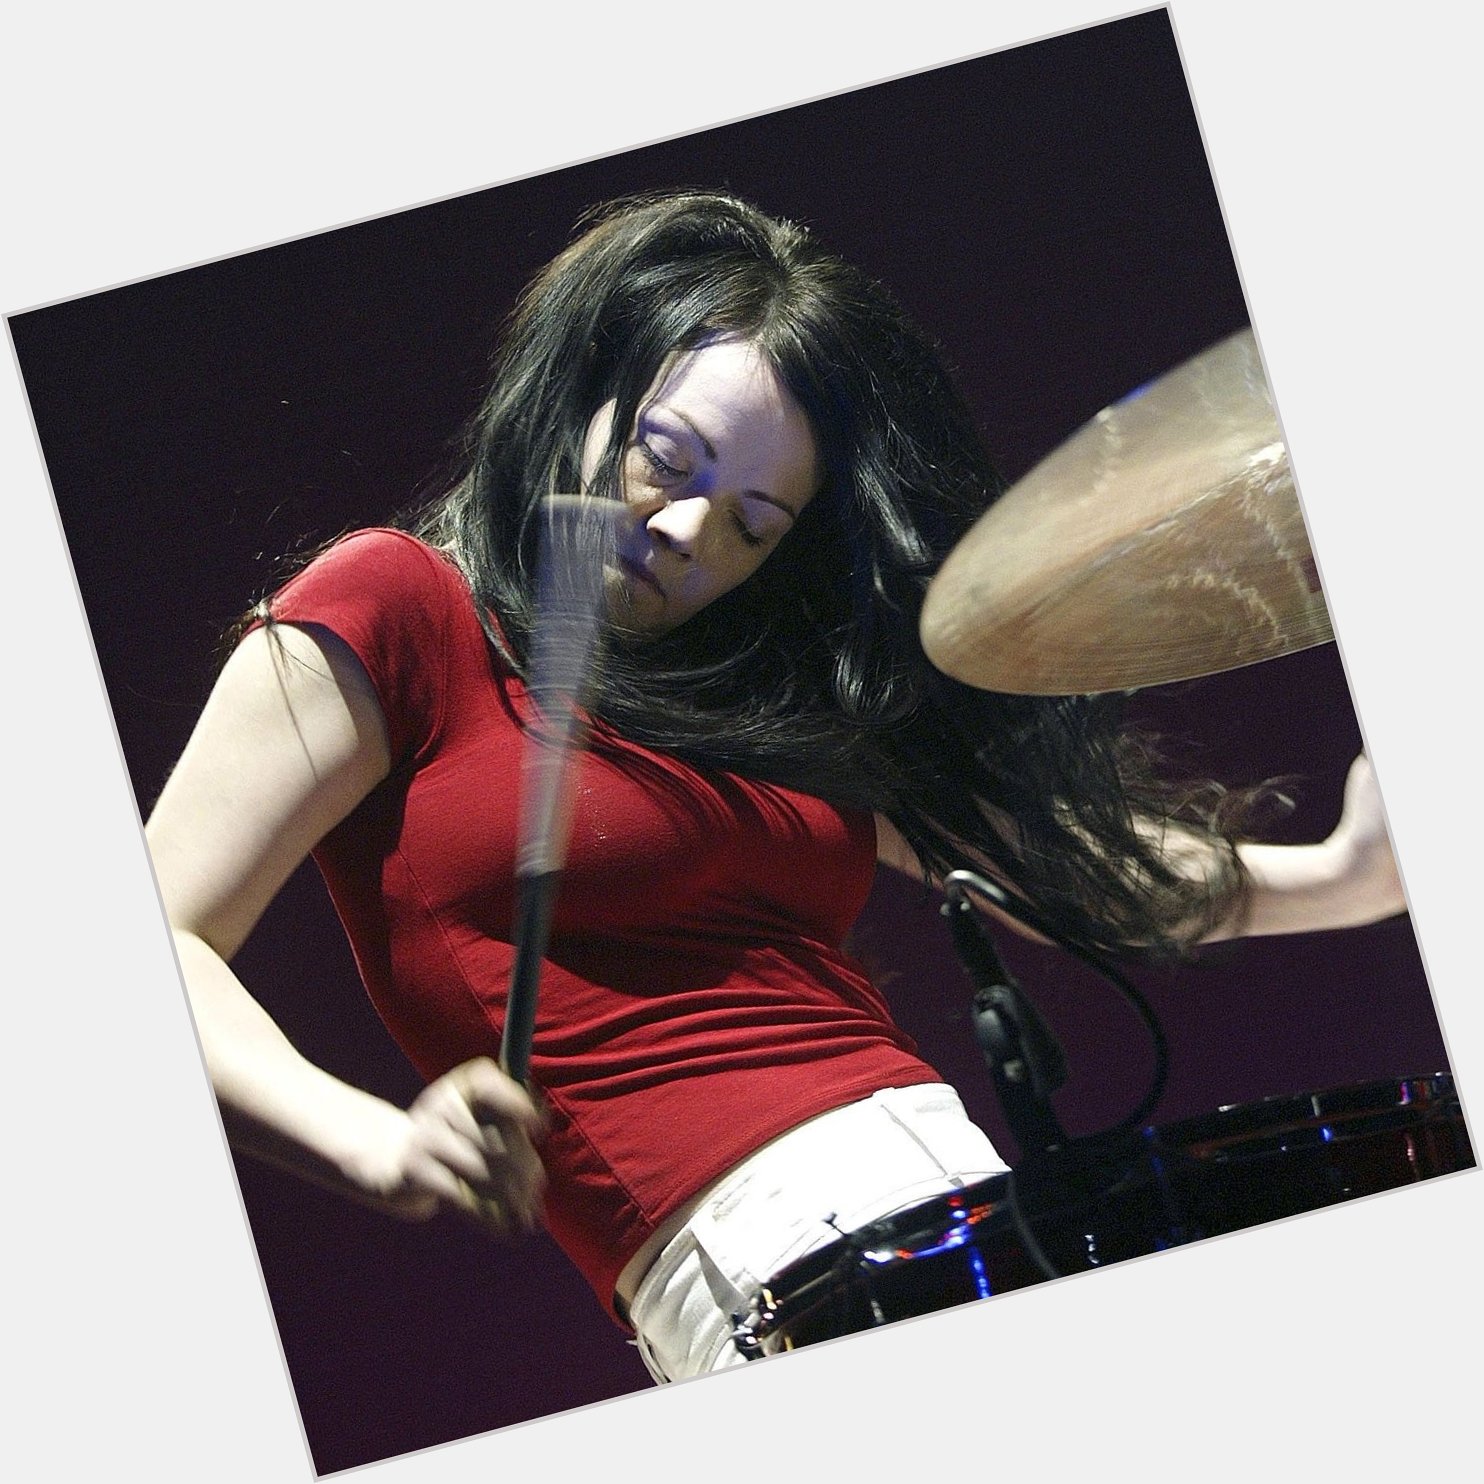 Happy Birthday to Meg White, one of the all-time greats!  